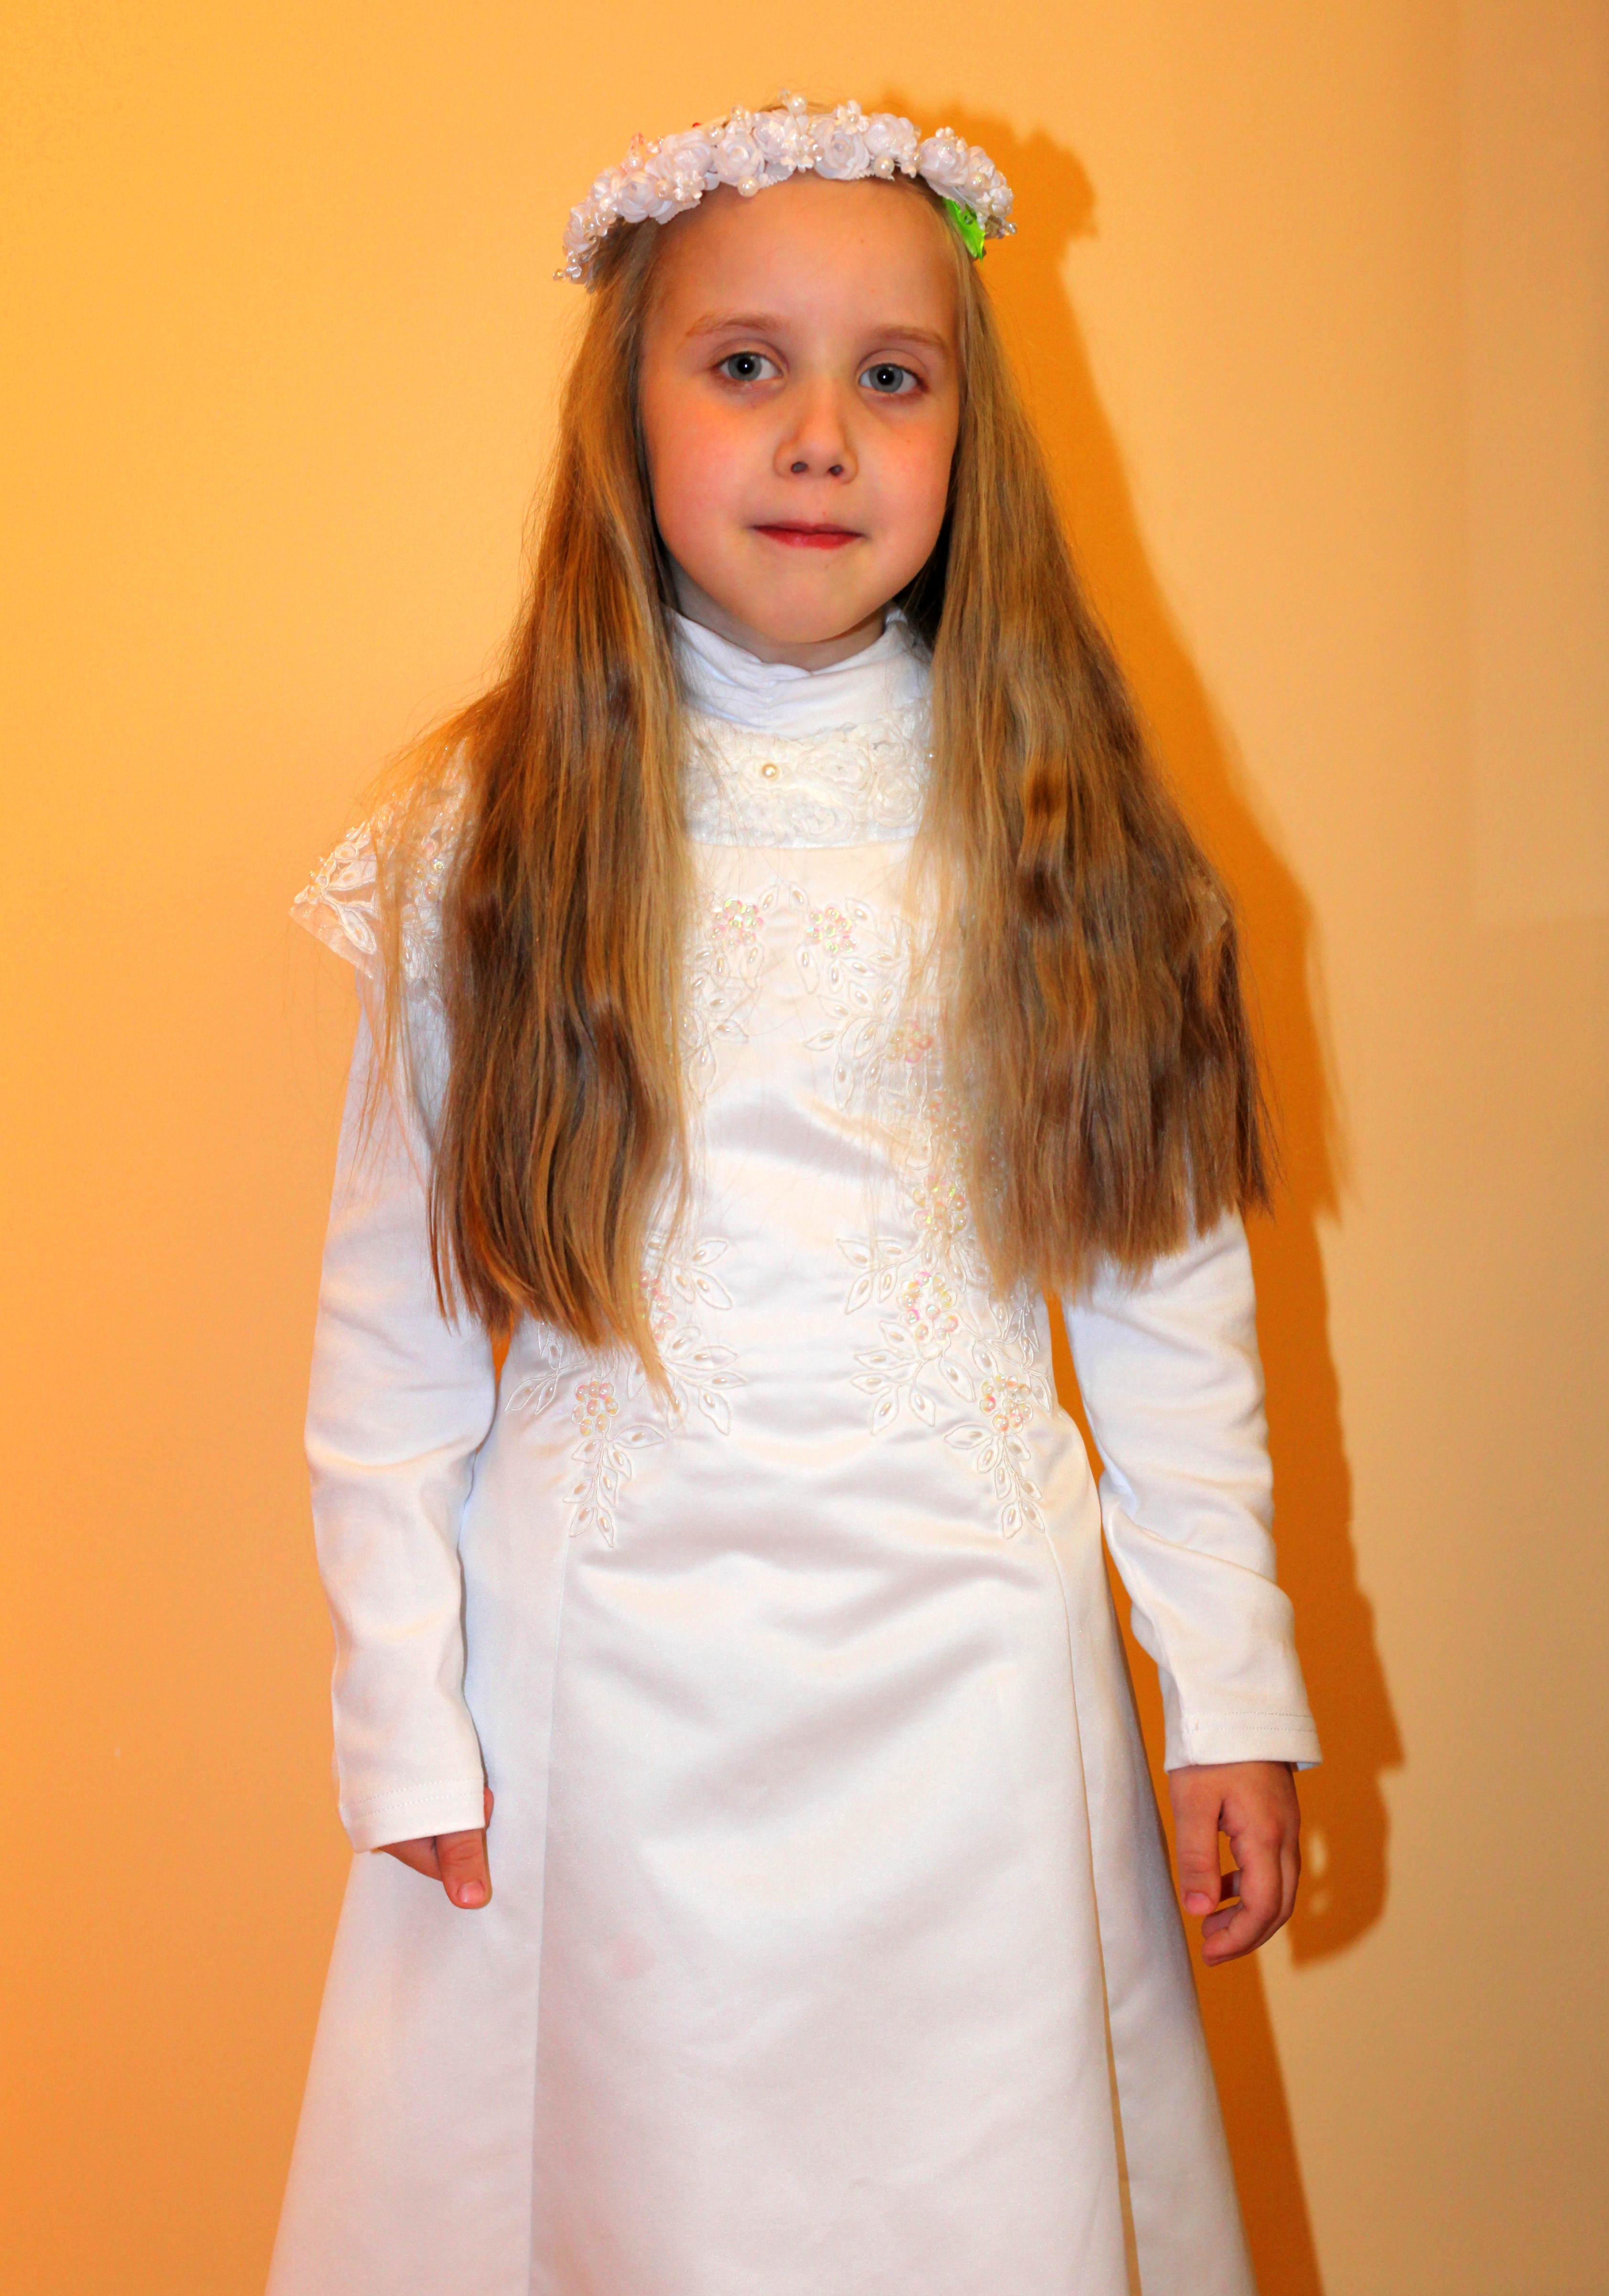 a Catholic girl preparing to her first Holy Communion in May 2013